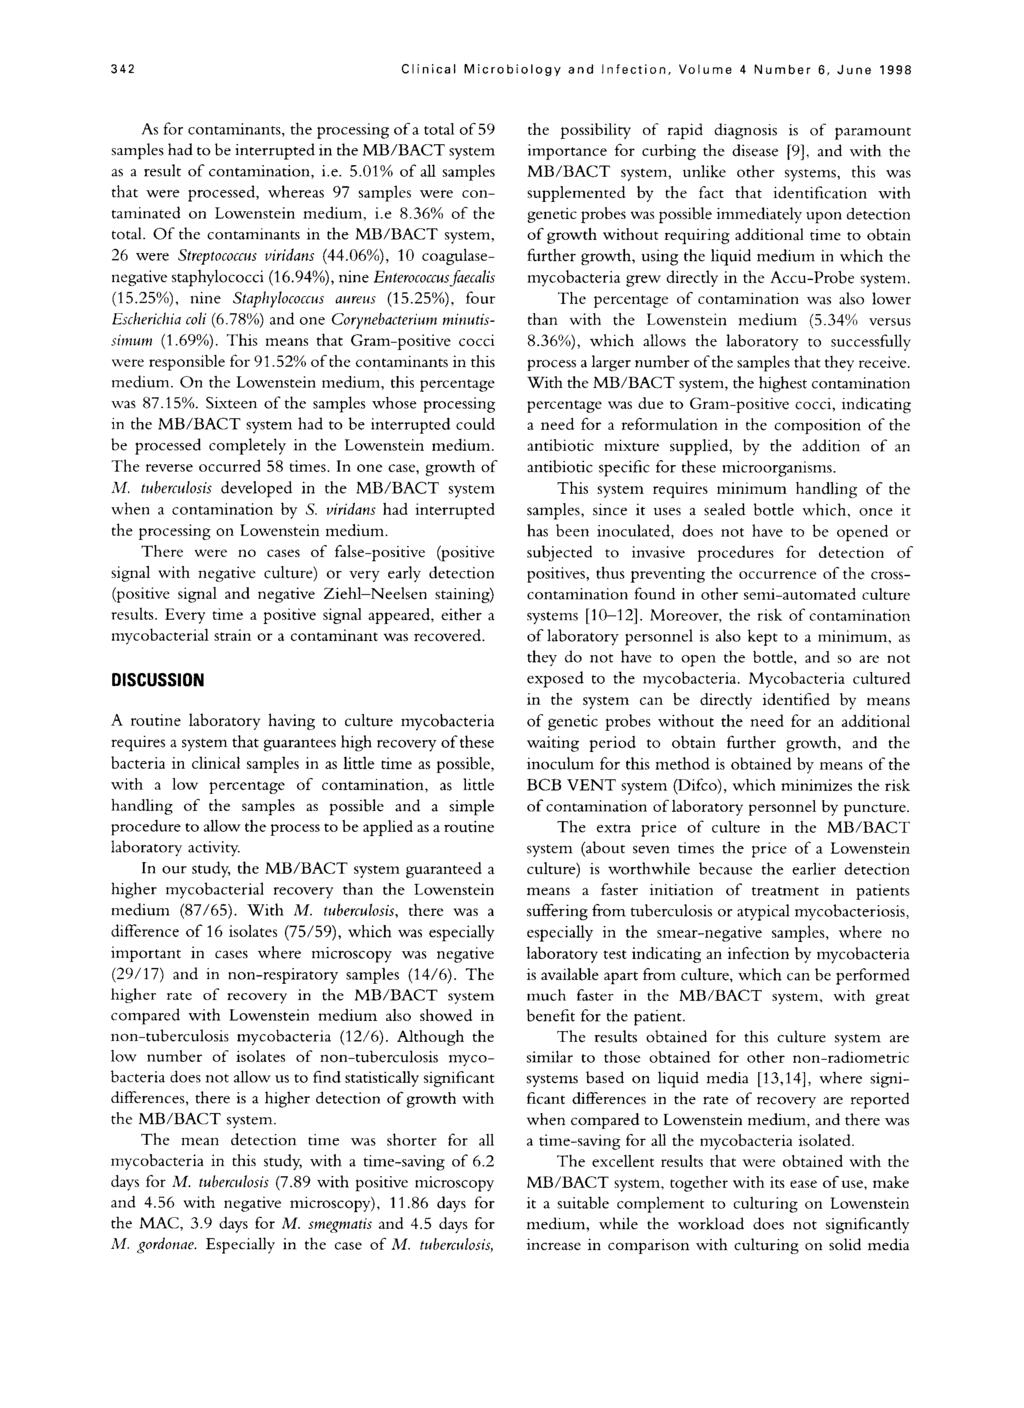 342 Clinical Microbiology and Infection, Volume 4 Number 6, June 1998 As for contaminants, the processing of a total of 59 samples had to be interrupted in the MB/BACT system as a result of